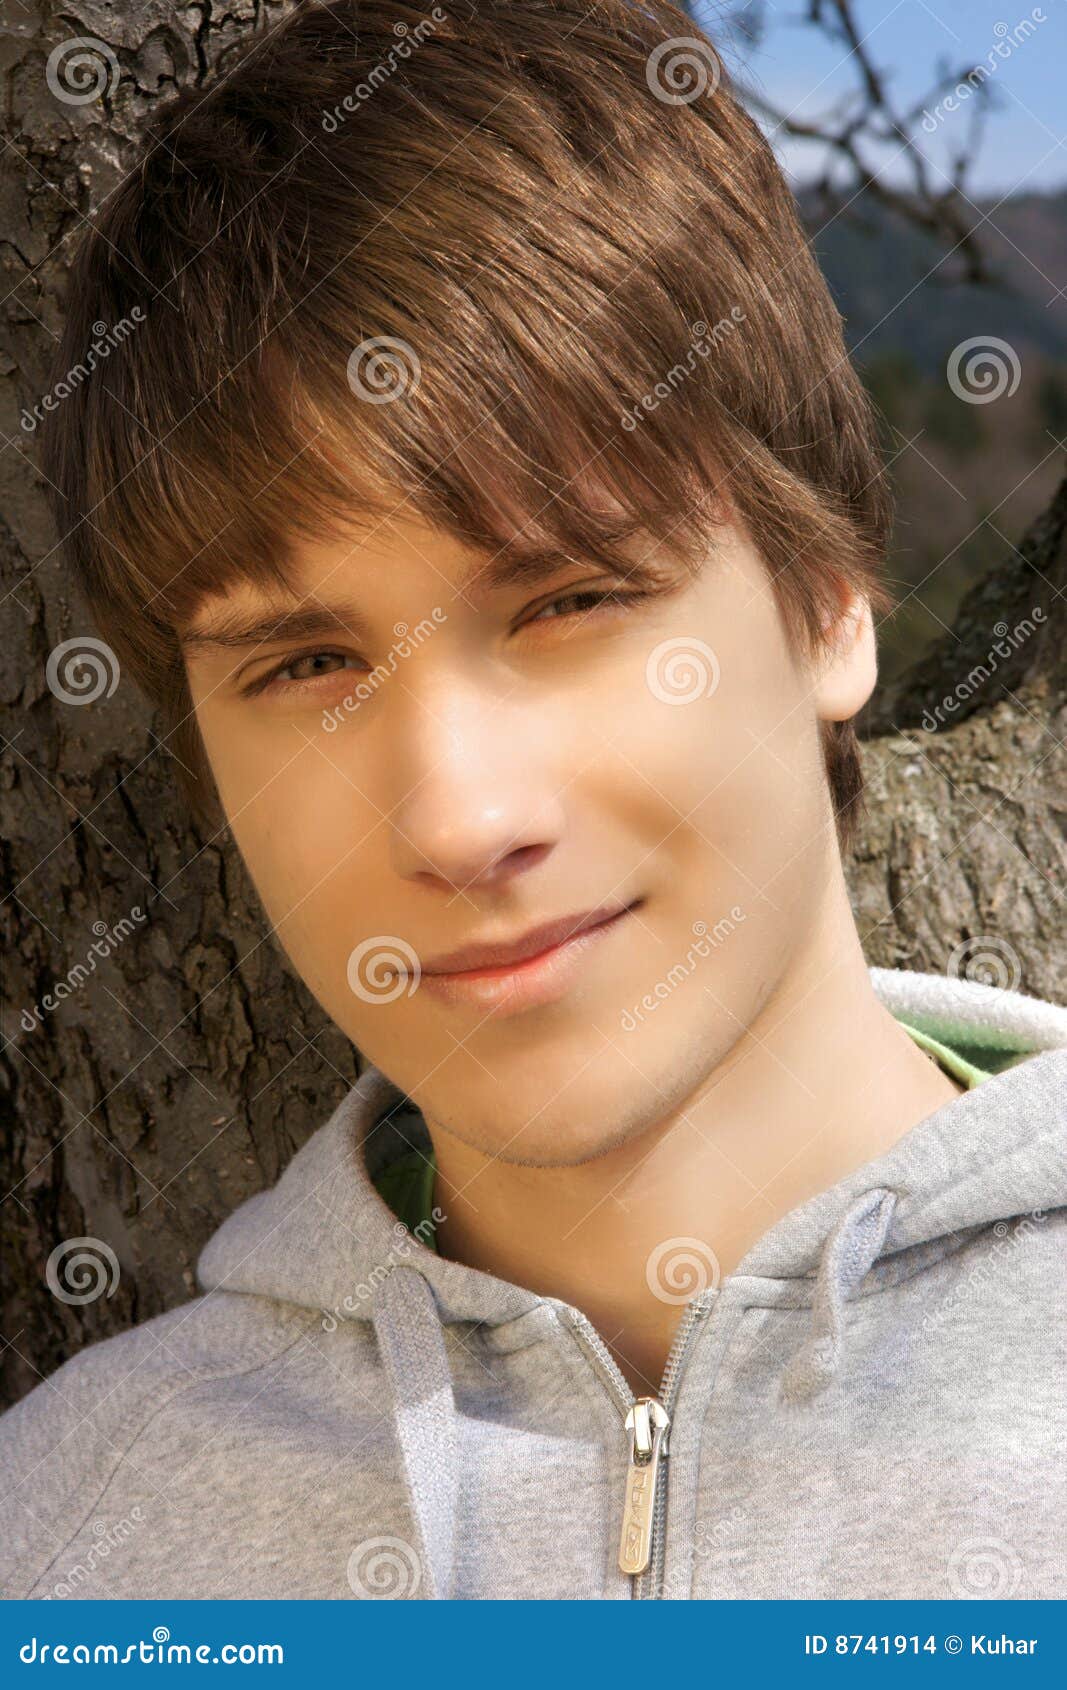 Teen boy outside. stock photo. Image of style, model, young - 8741914